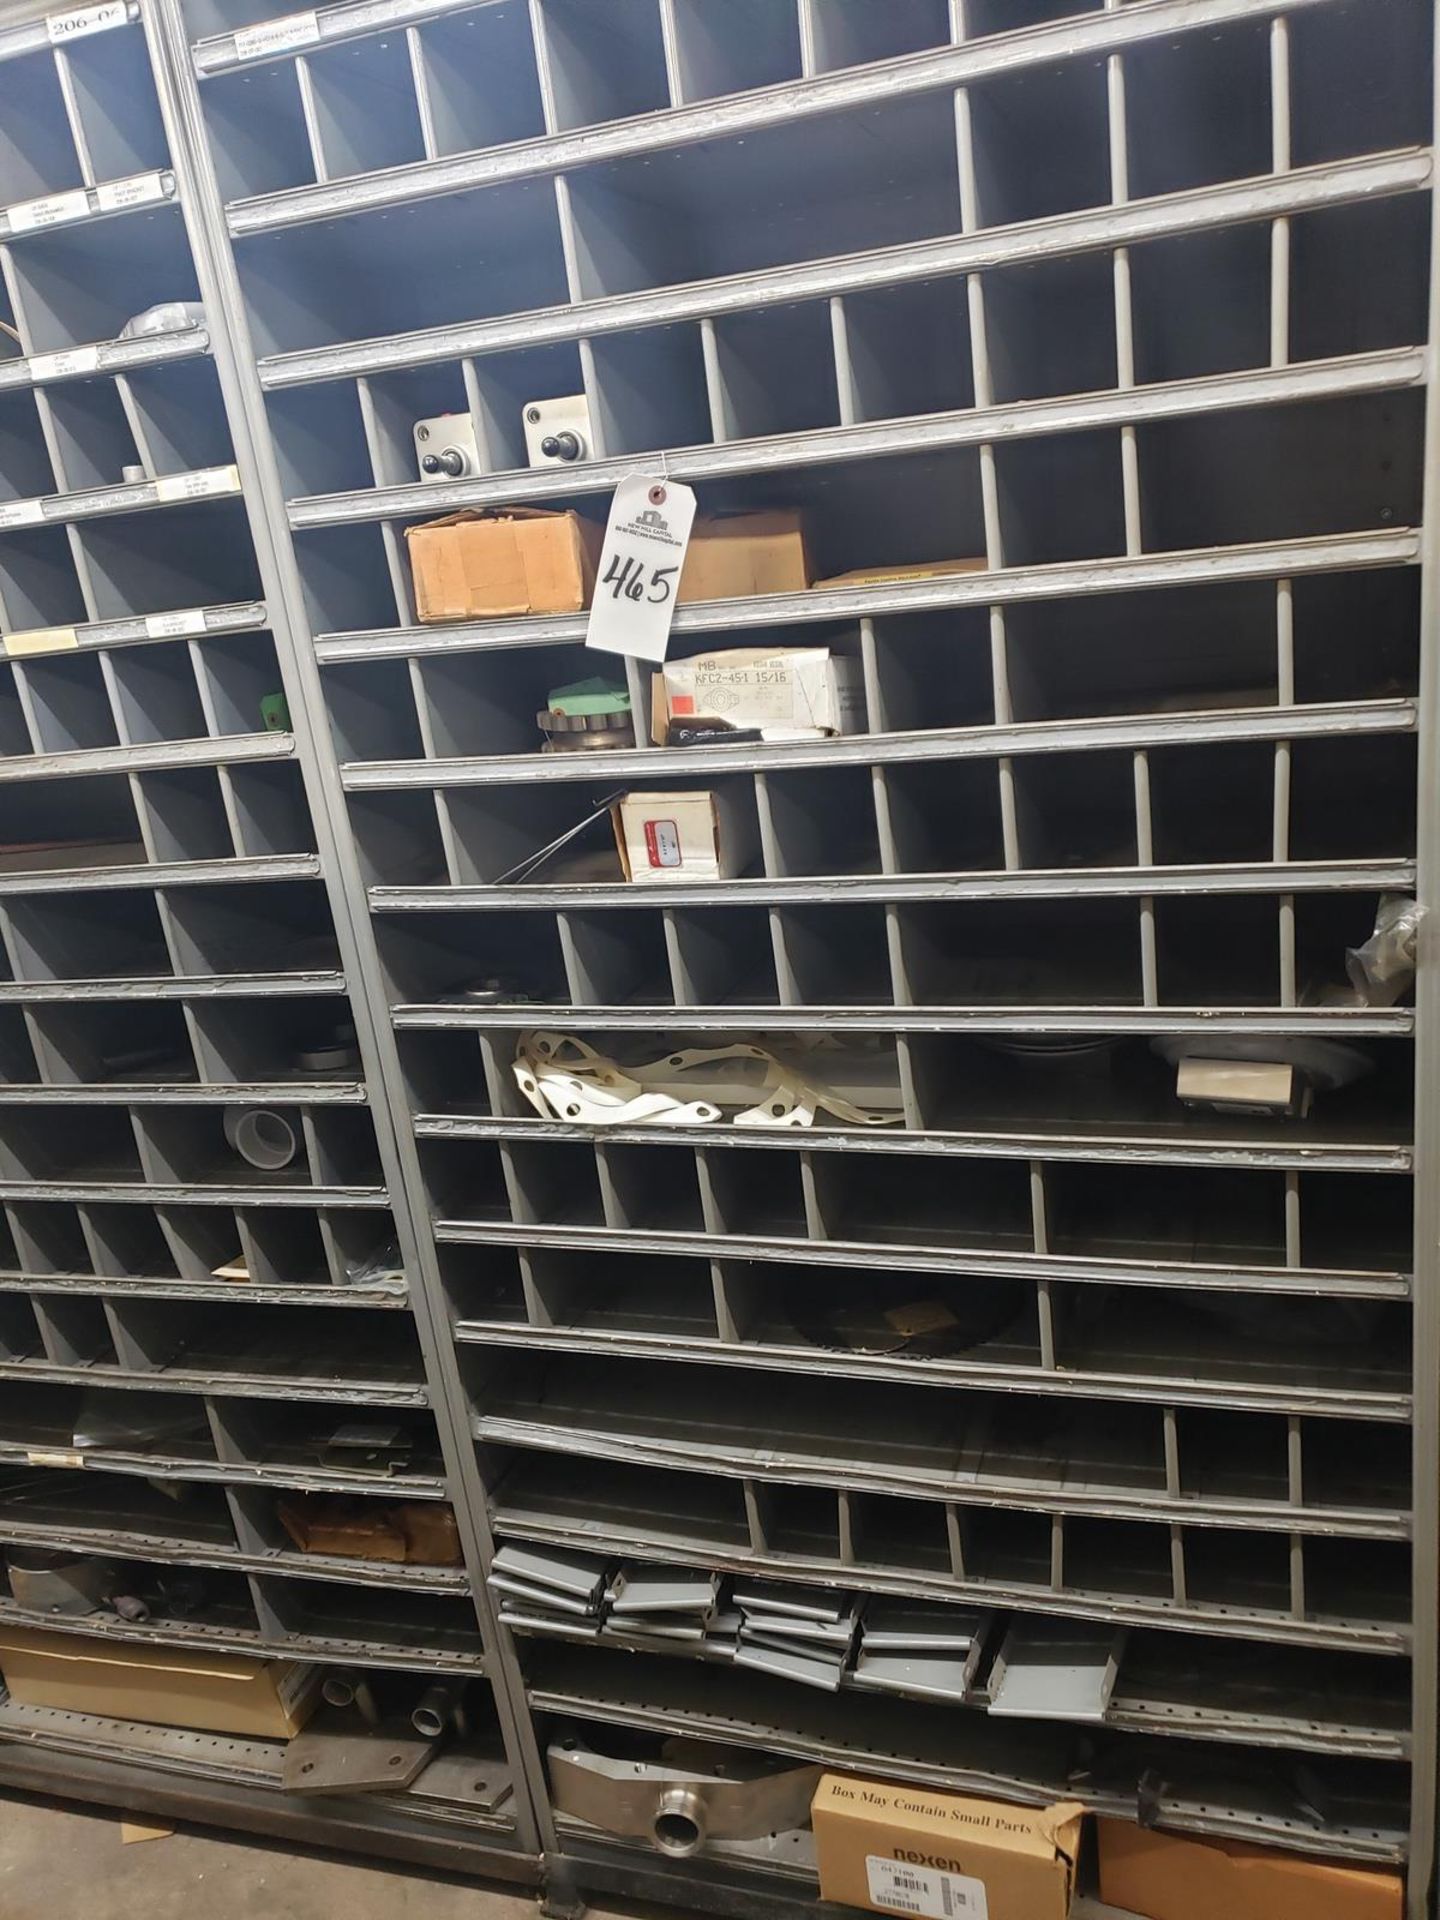 Contents of Storage Shelf Section, Spare Parts